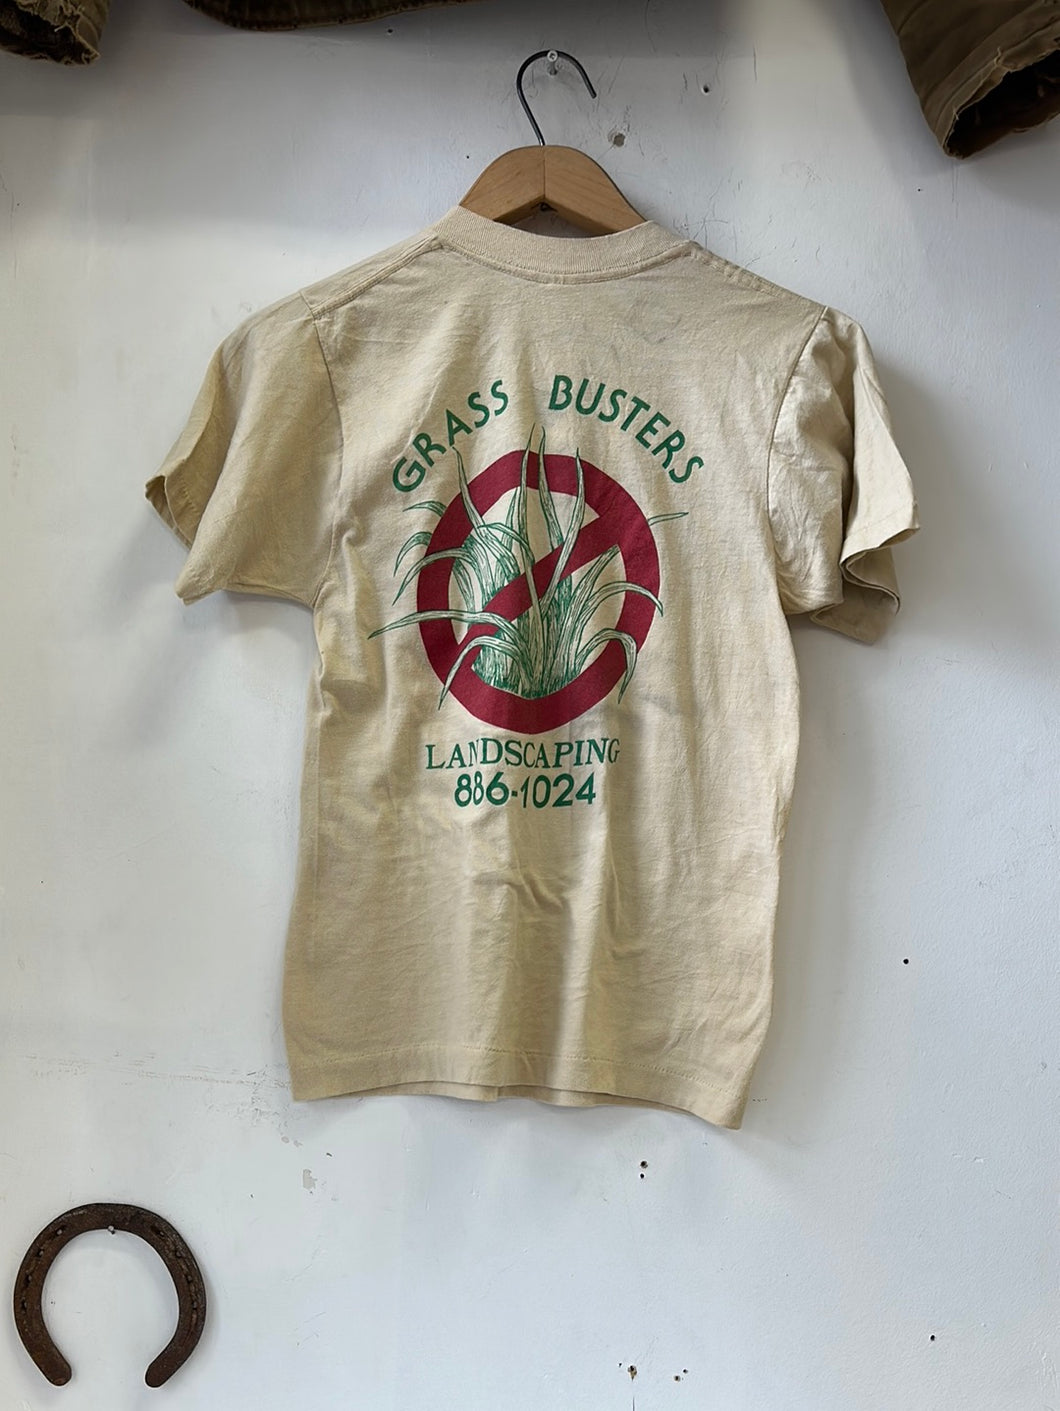 1980s “Grass Busters” Tee